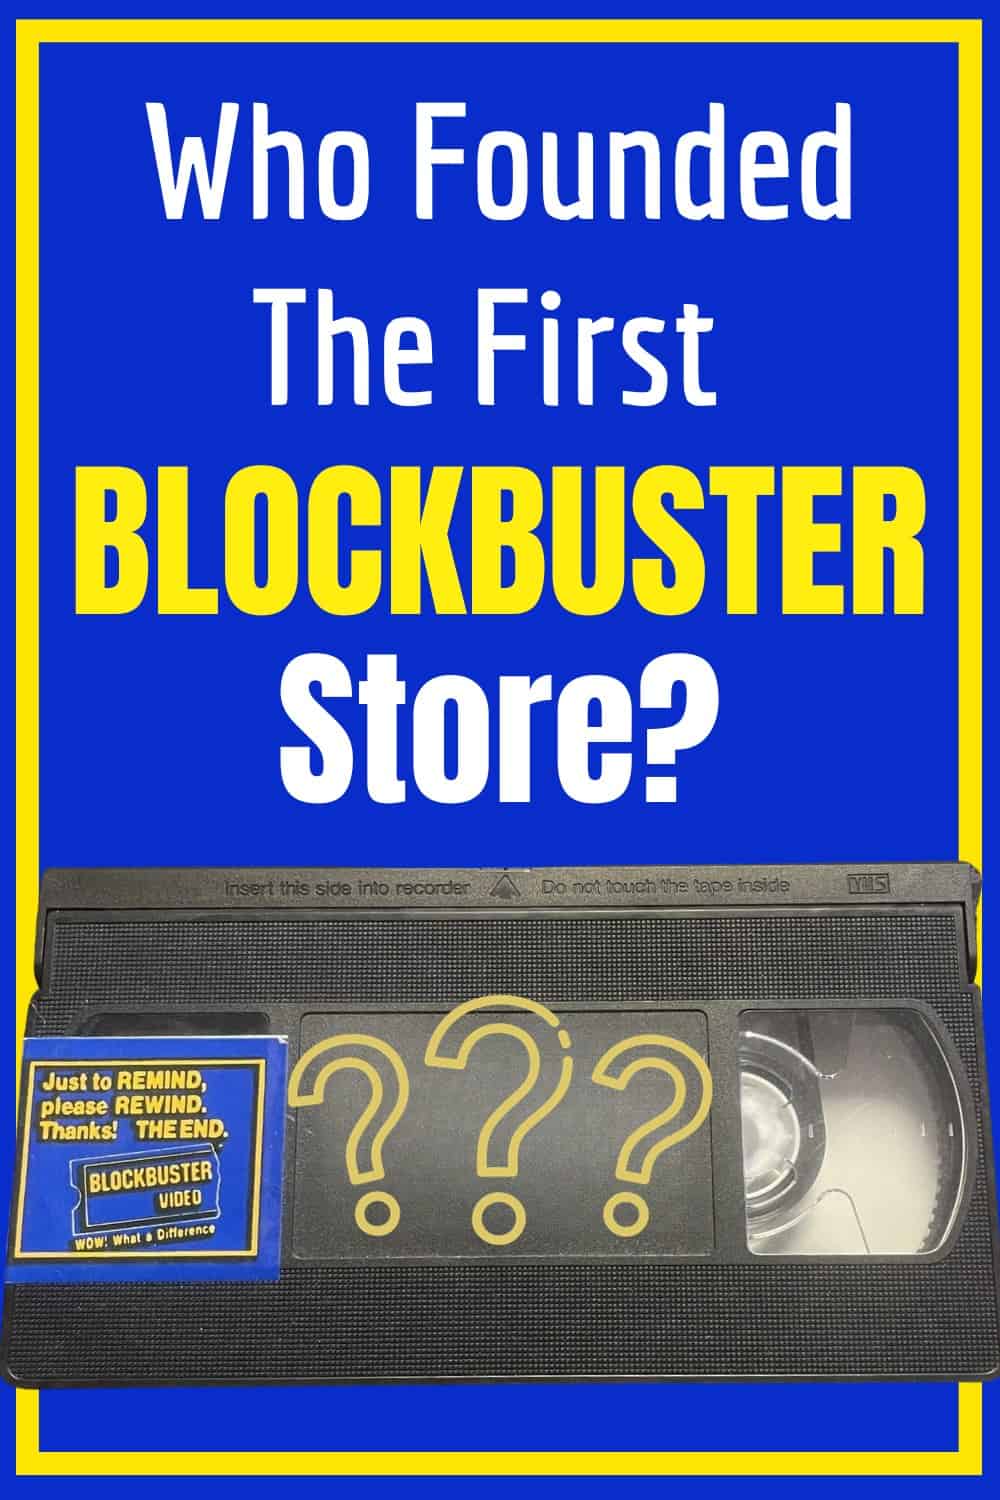 Blockbuster was founded by David Cook in 1985